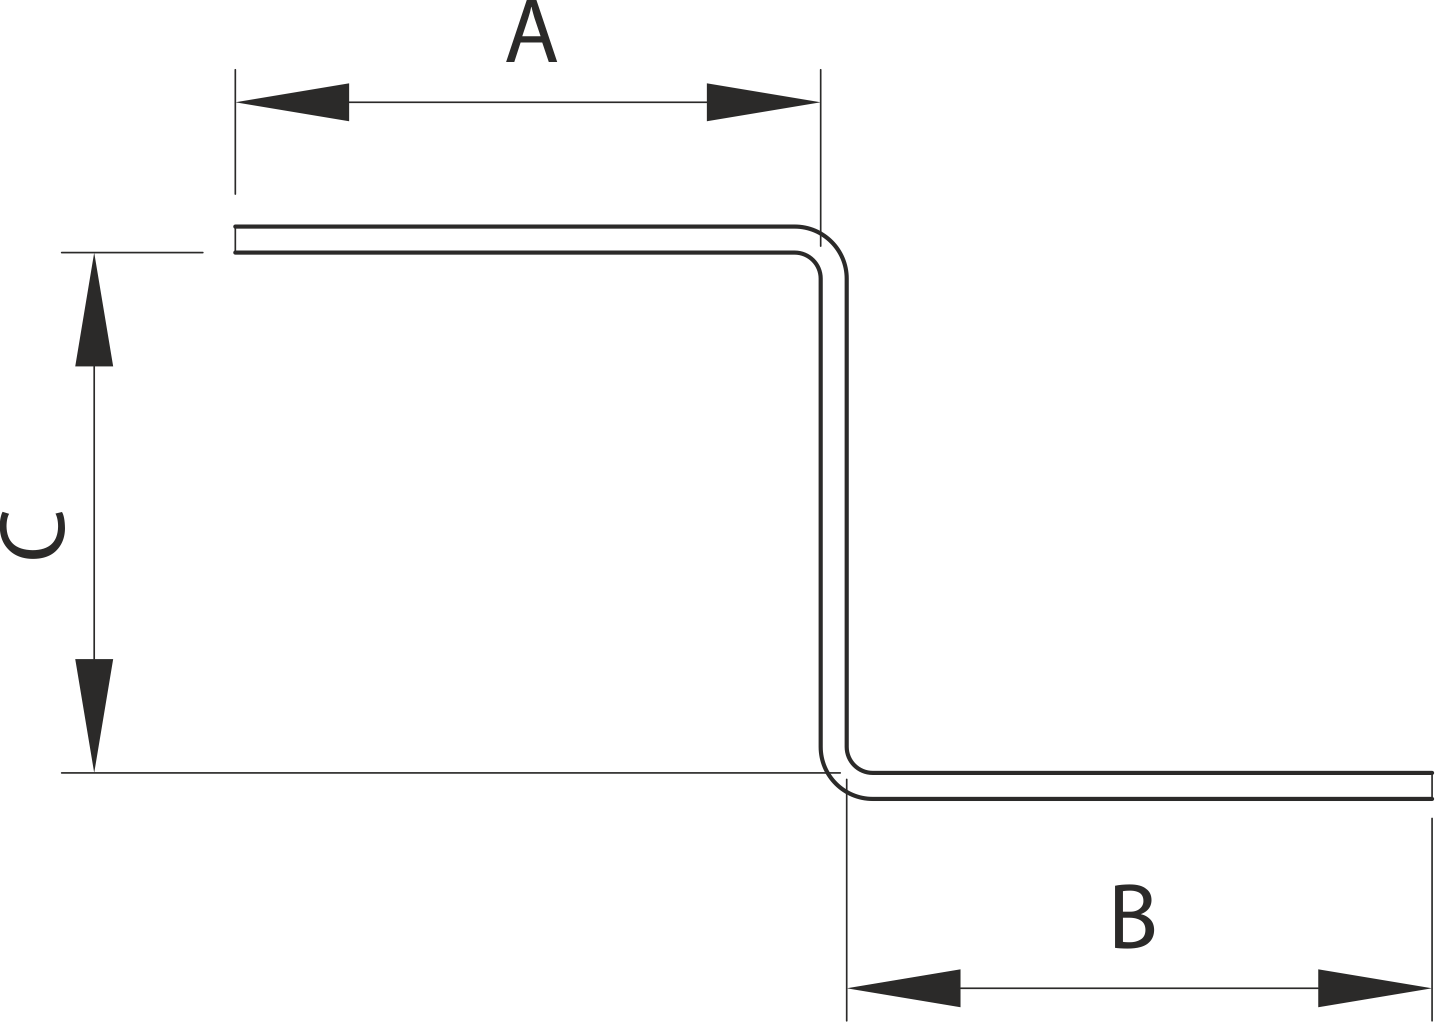 Auxiliary sections Z